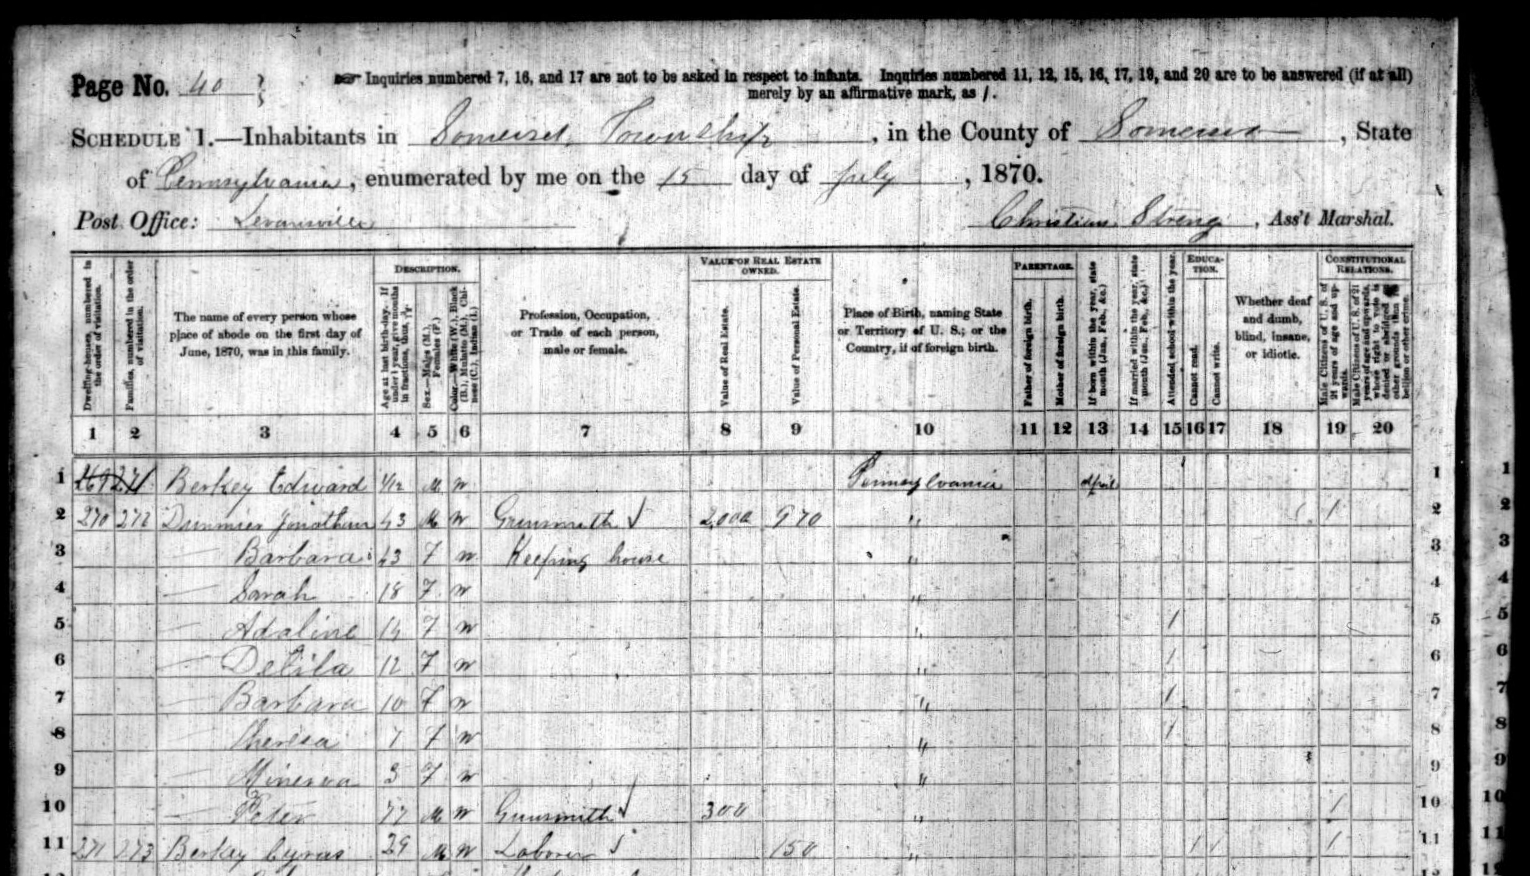  Jonathan Dunmier is enumerated as a 43-year-old Pennsylvania-born gunsmith in the 1870 federal census of Somerset Township, Somerset County, Pennsylvania.